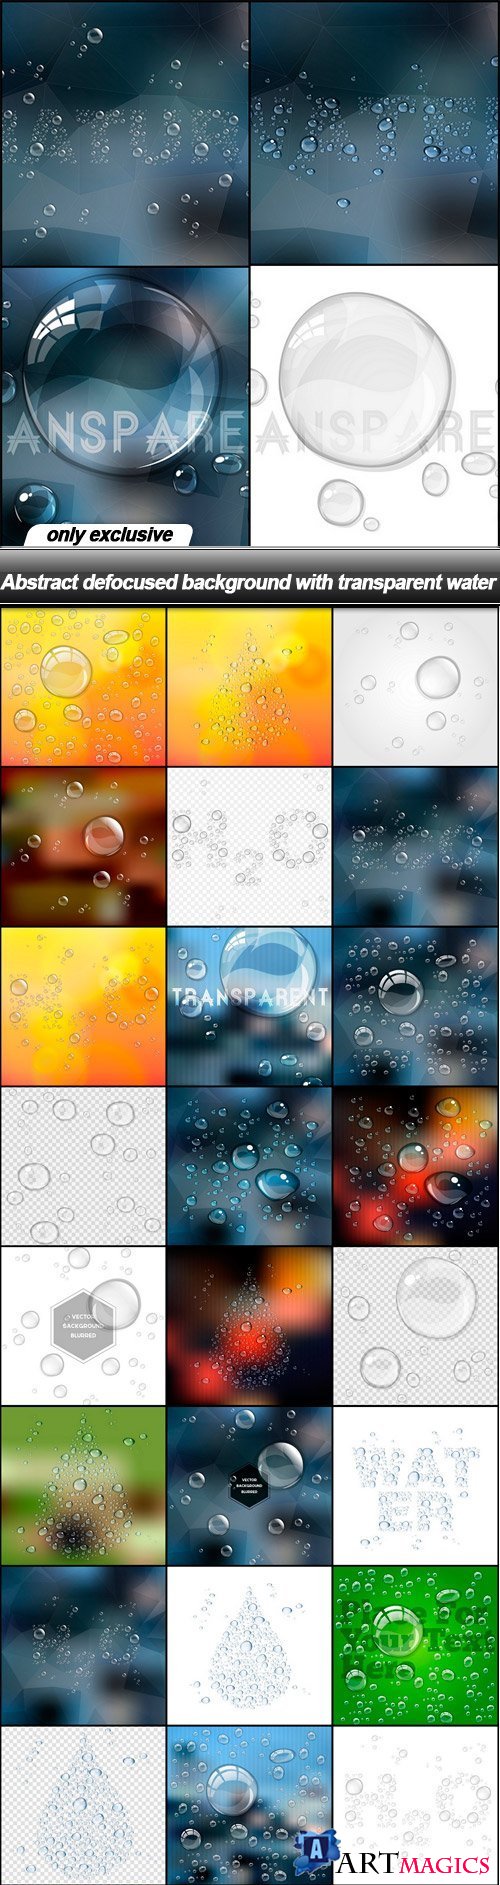 Abstract defocused background with transparent water - 34 EPS